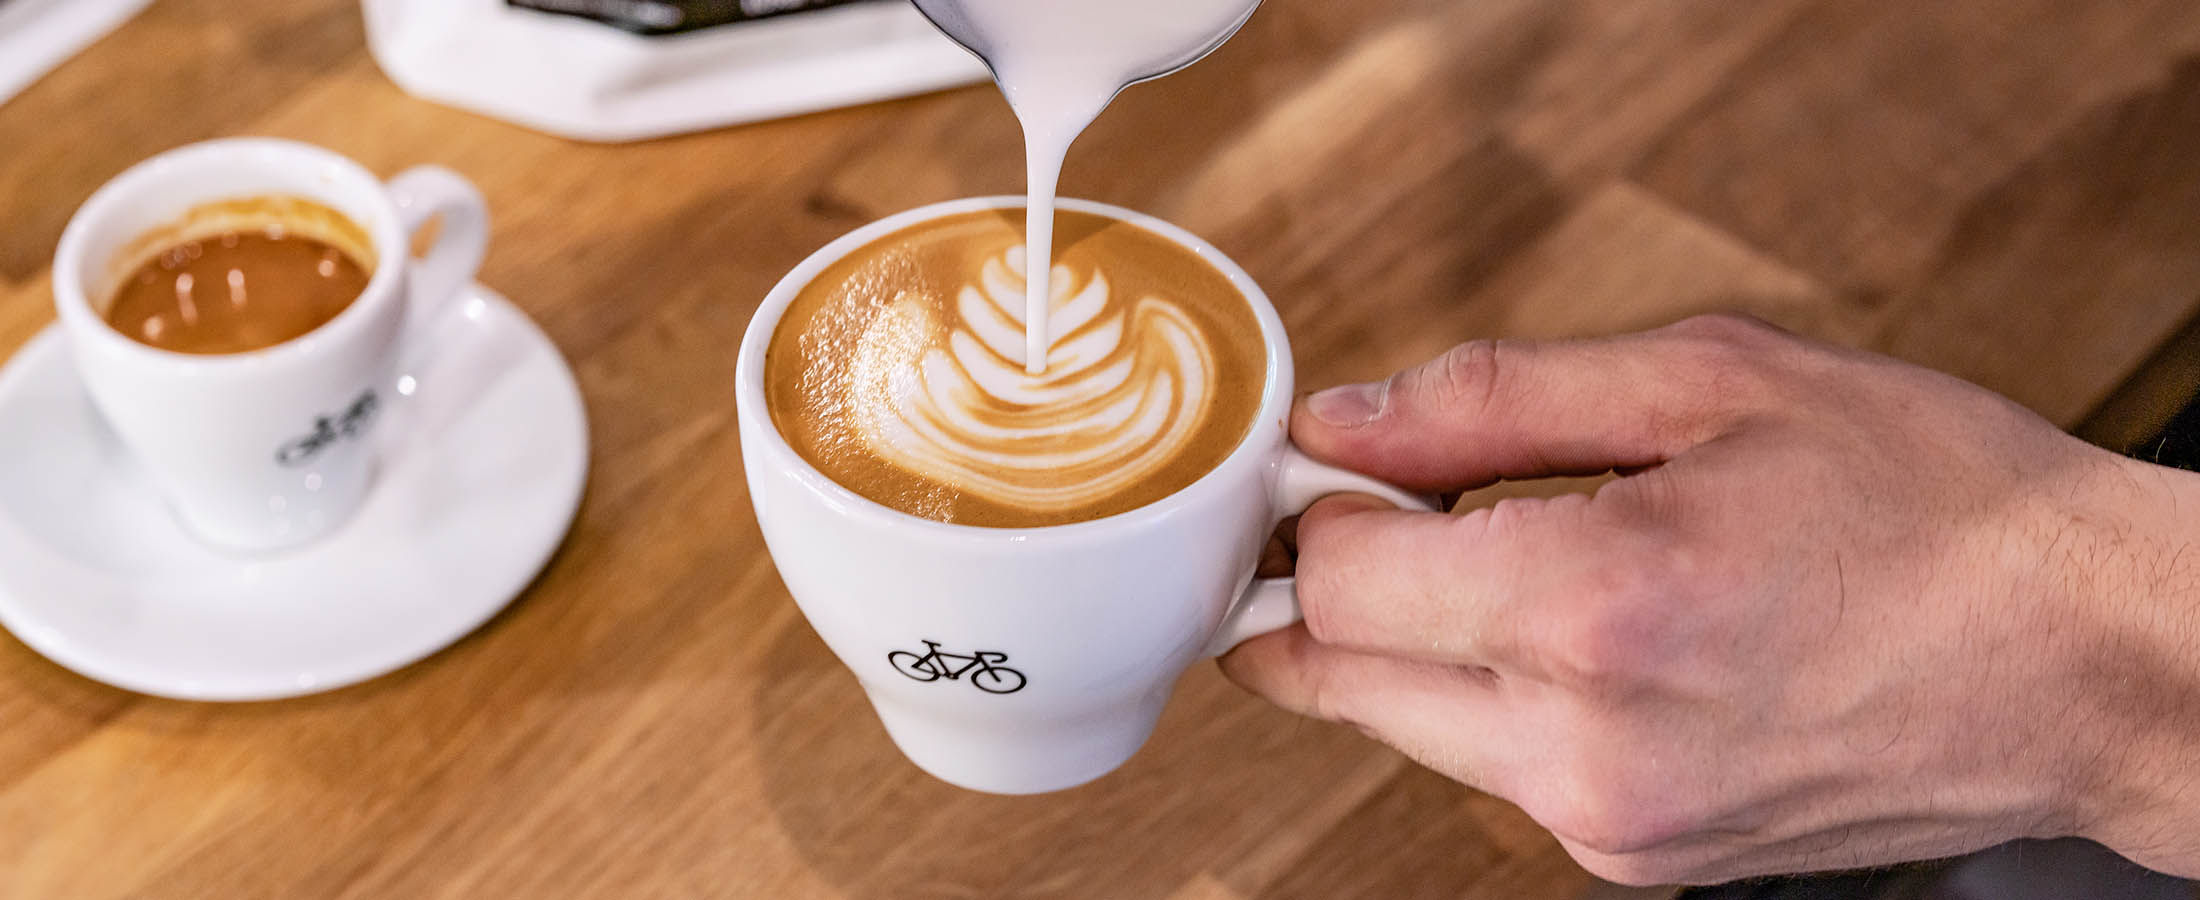 luxa cycling coffee cup